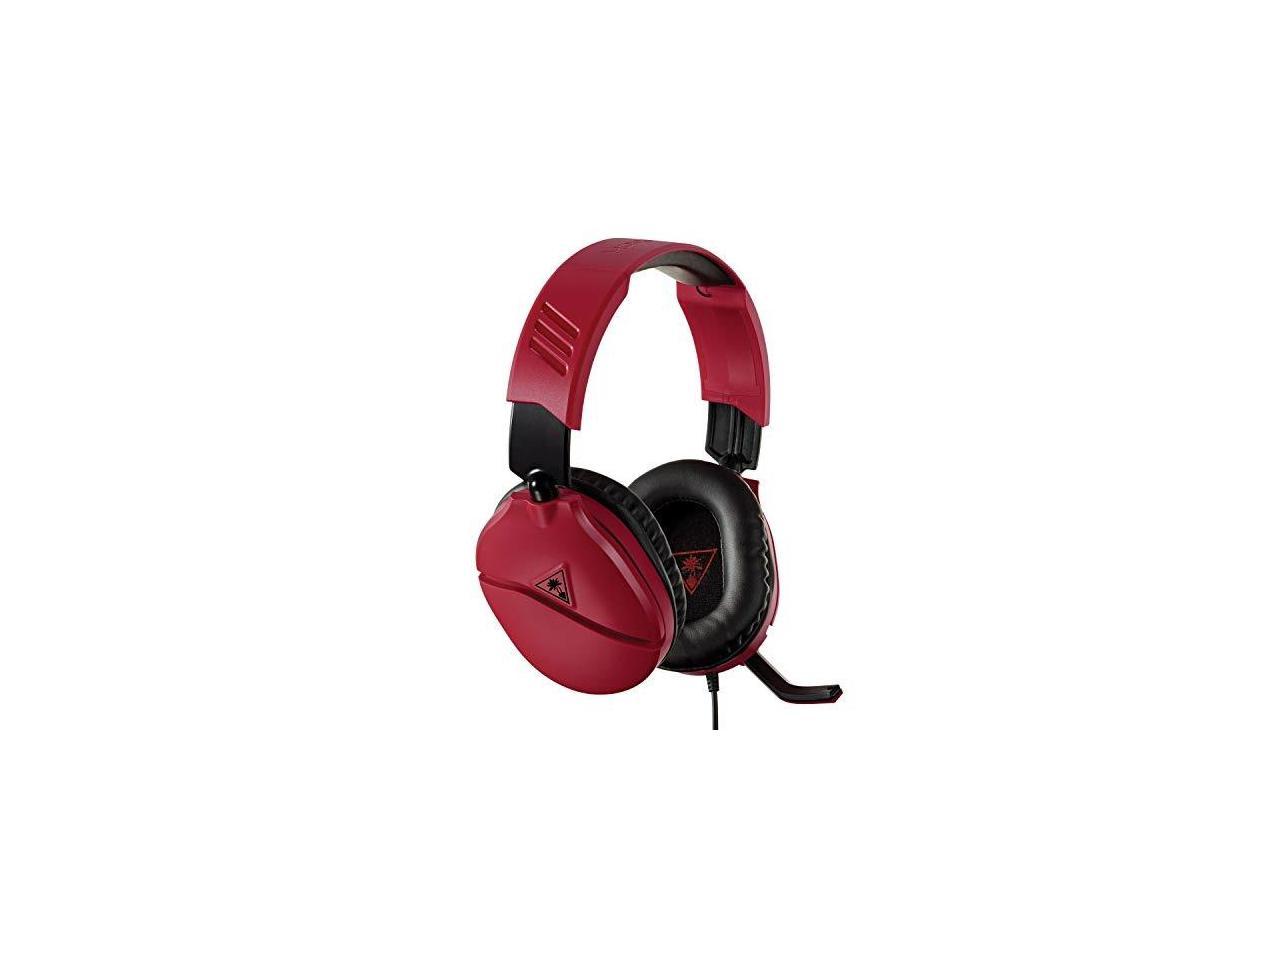 turtle beach headset ps4 red